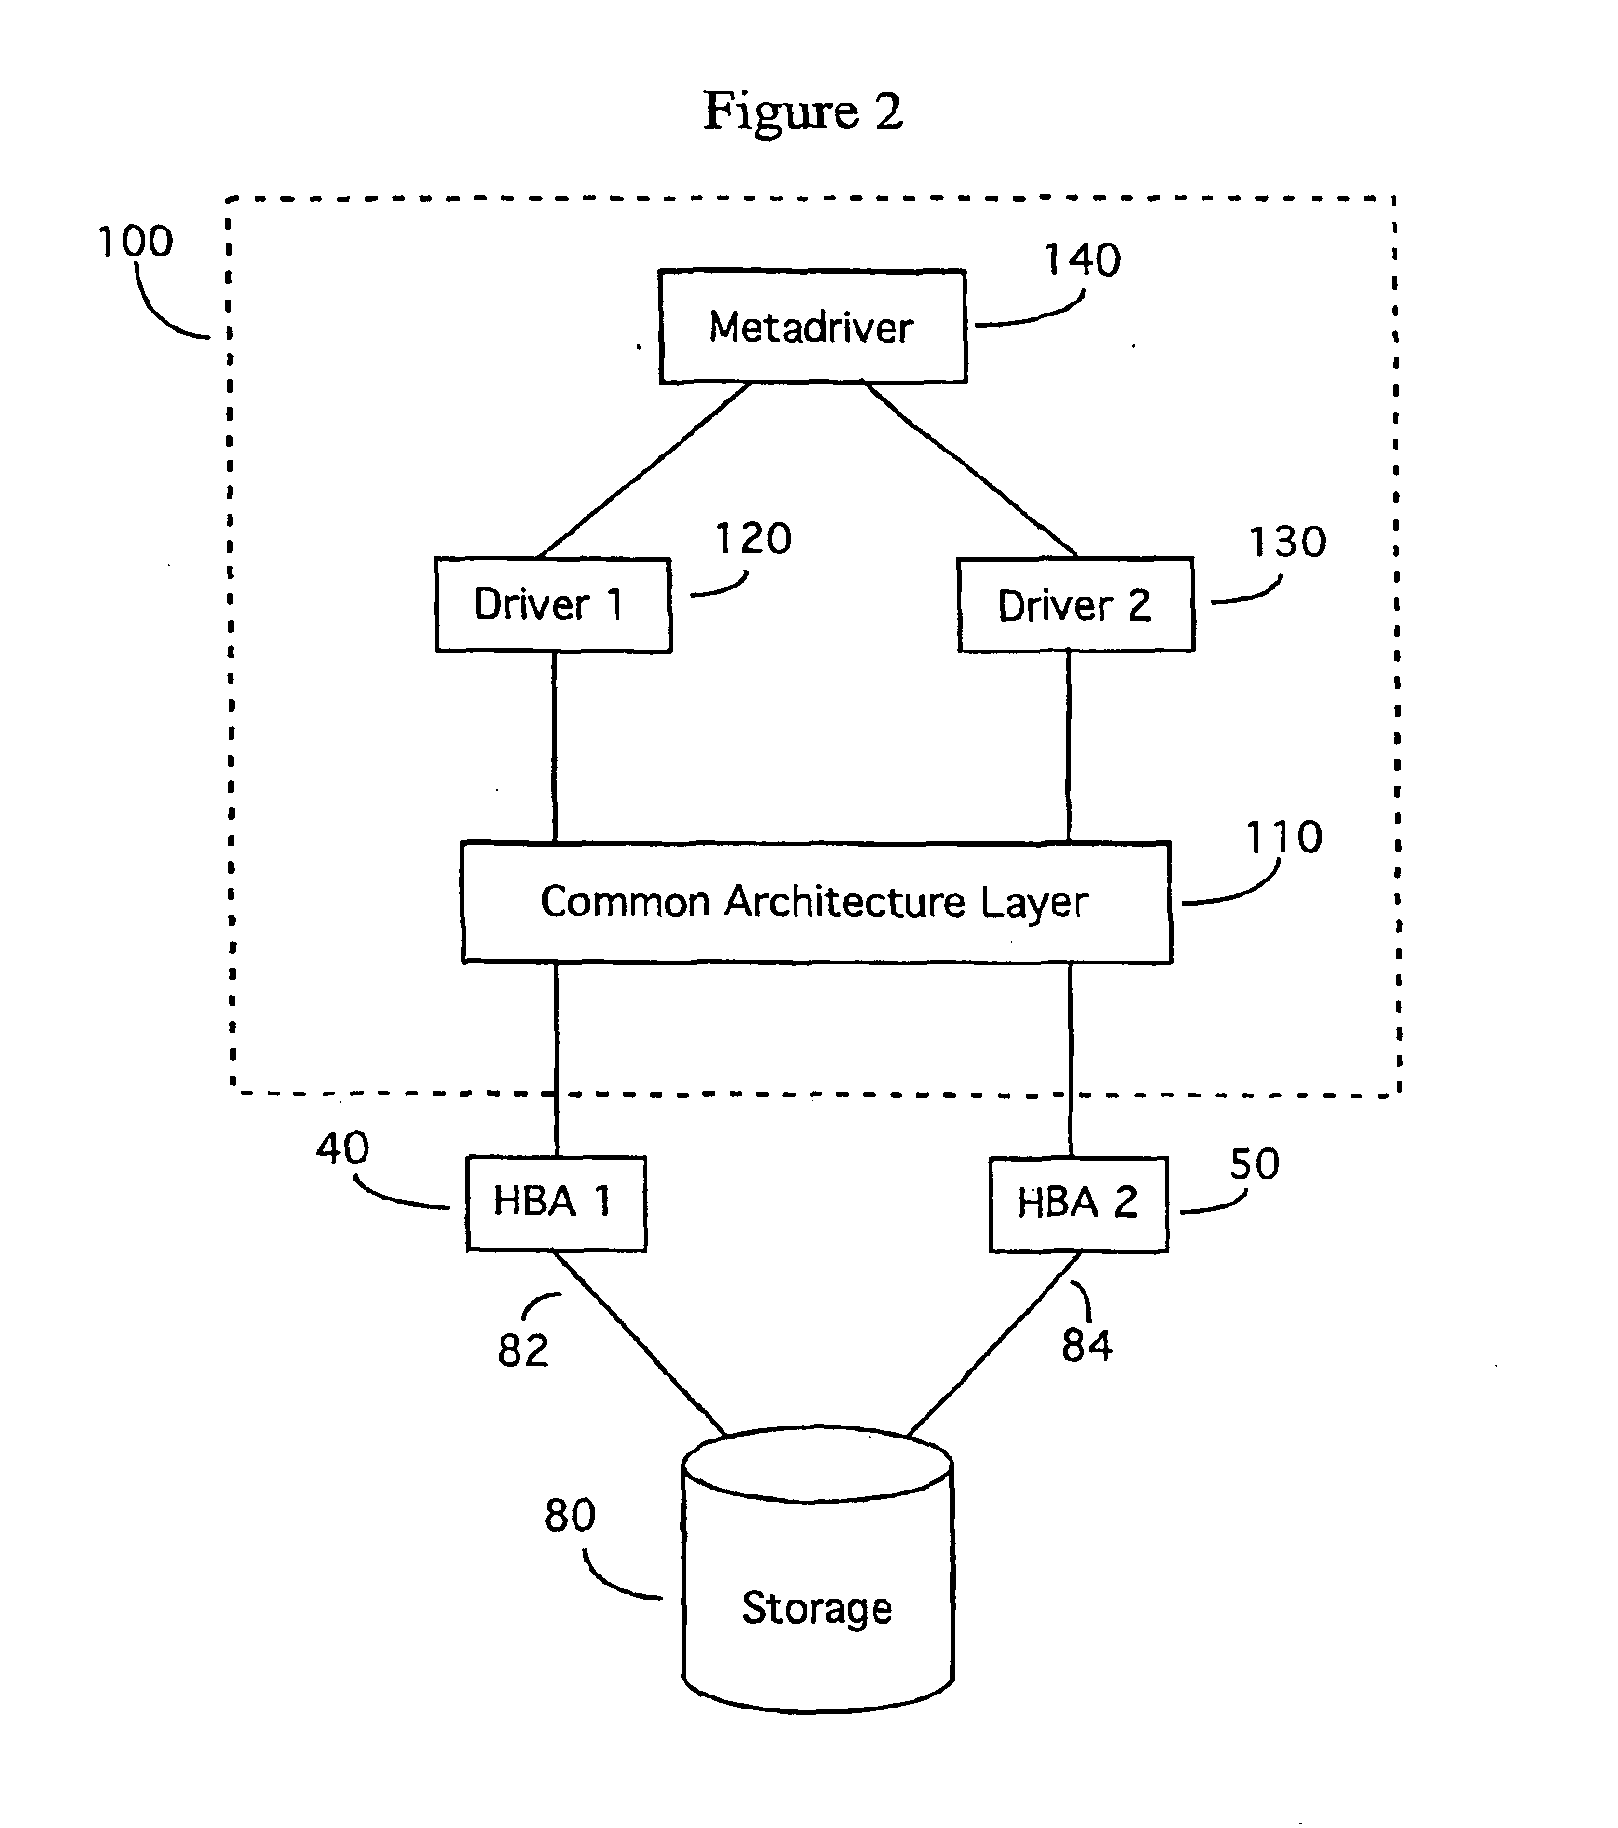 Virtual host controller interface with multipath input/output